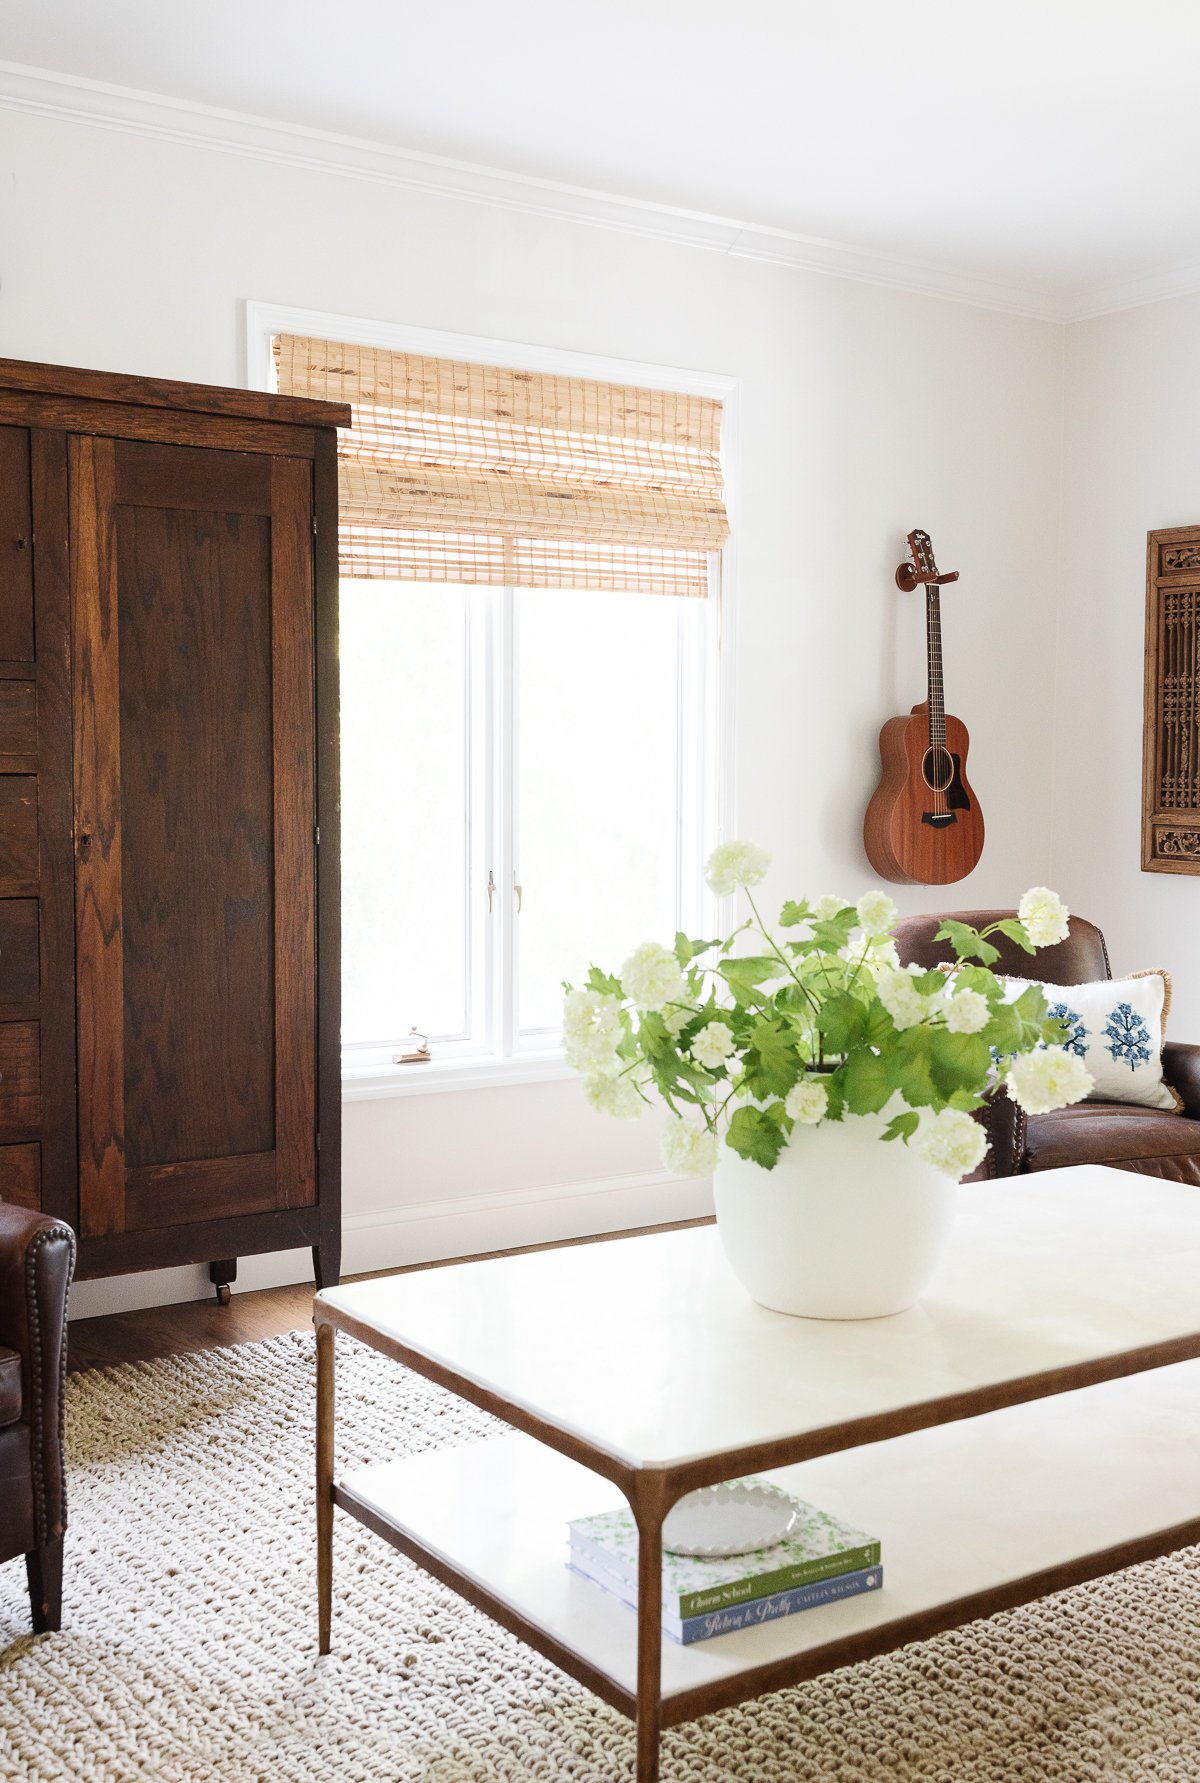 A bright living room featuring a wooden cabinet, a ukulele on the wall, a glass-top coffee table with dimensions suitable for the available space and ideal height for comfort, with a book, and